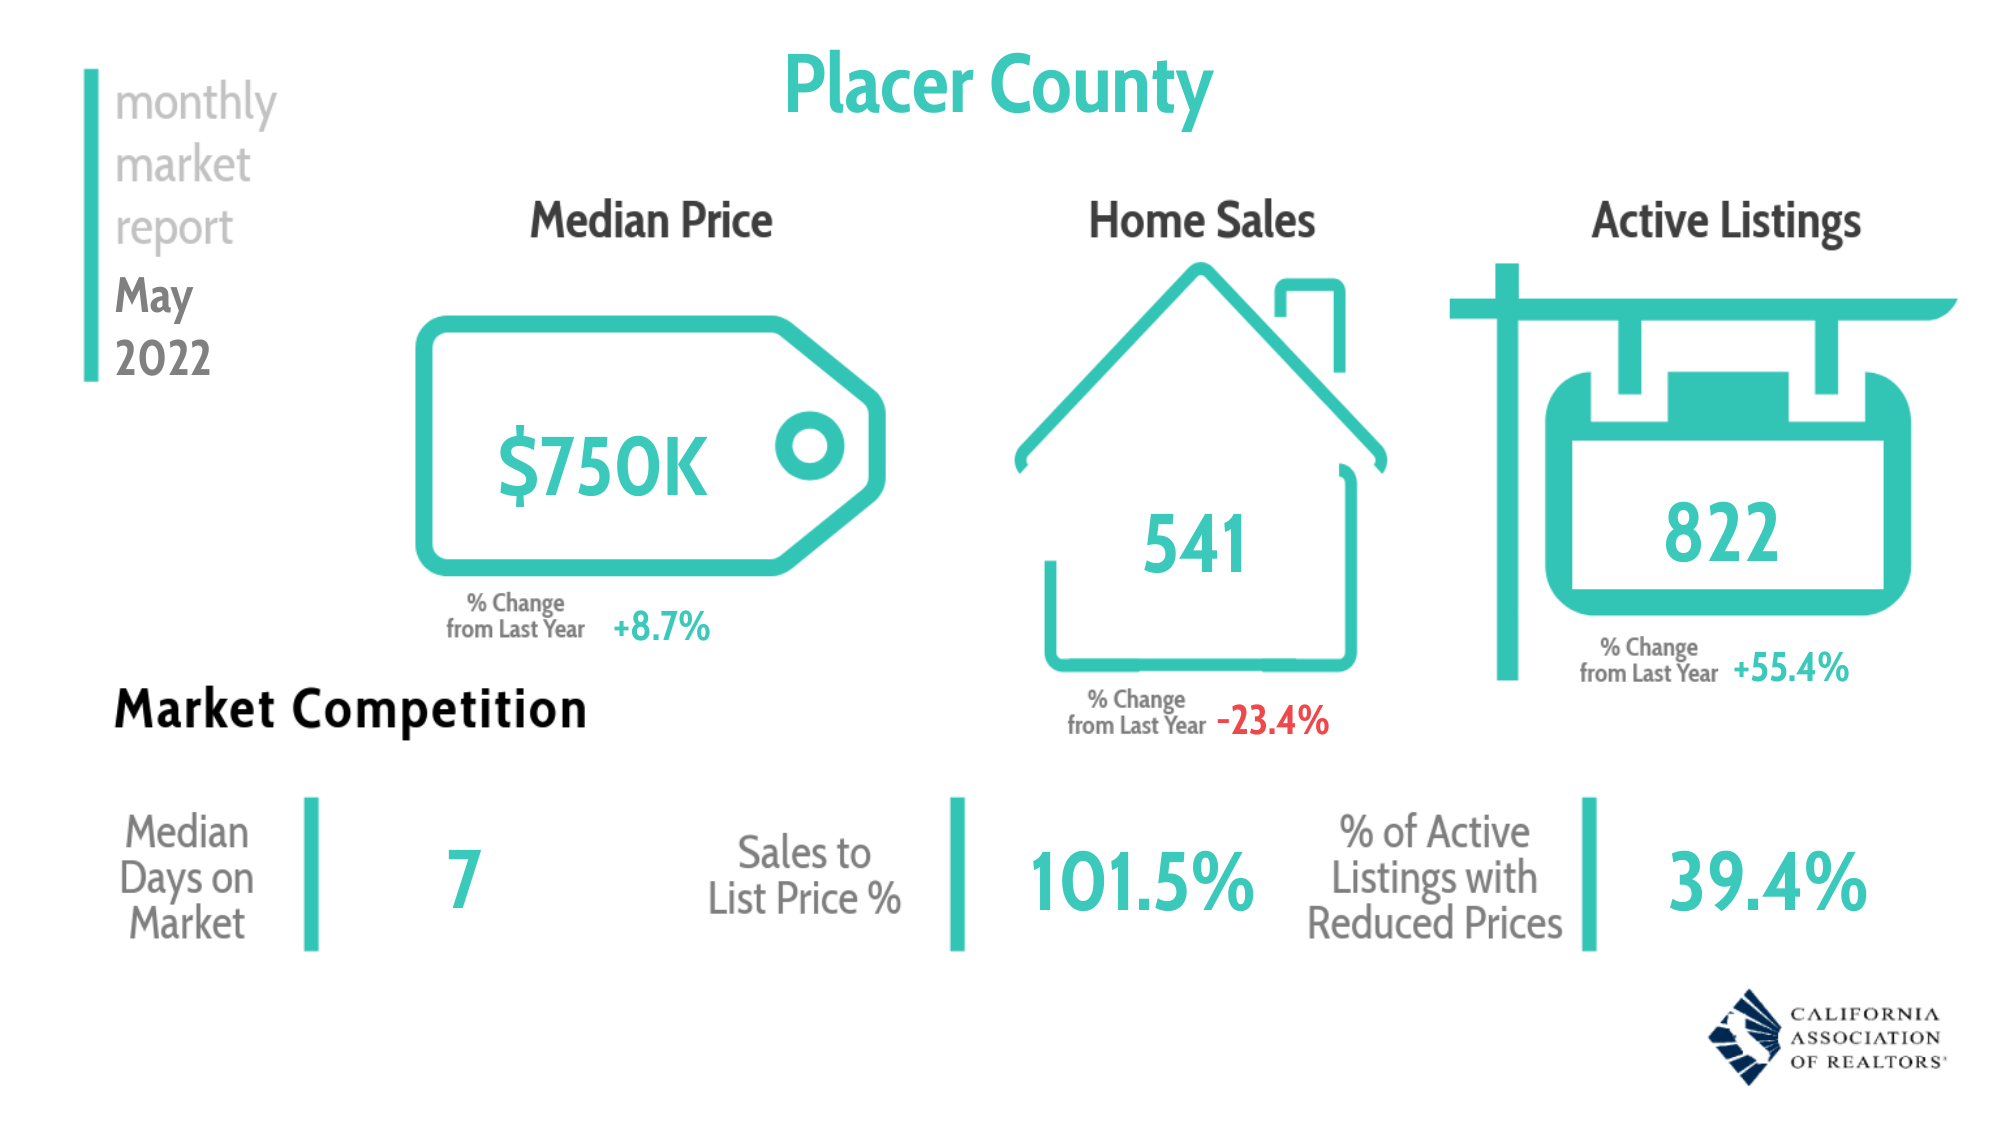 Placer County Real Estate Update